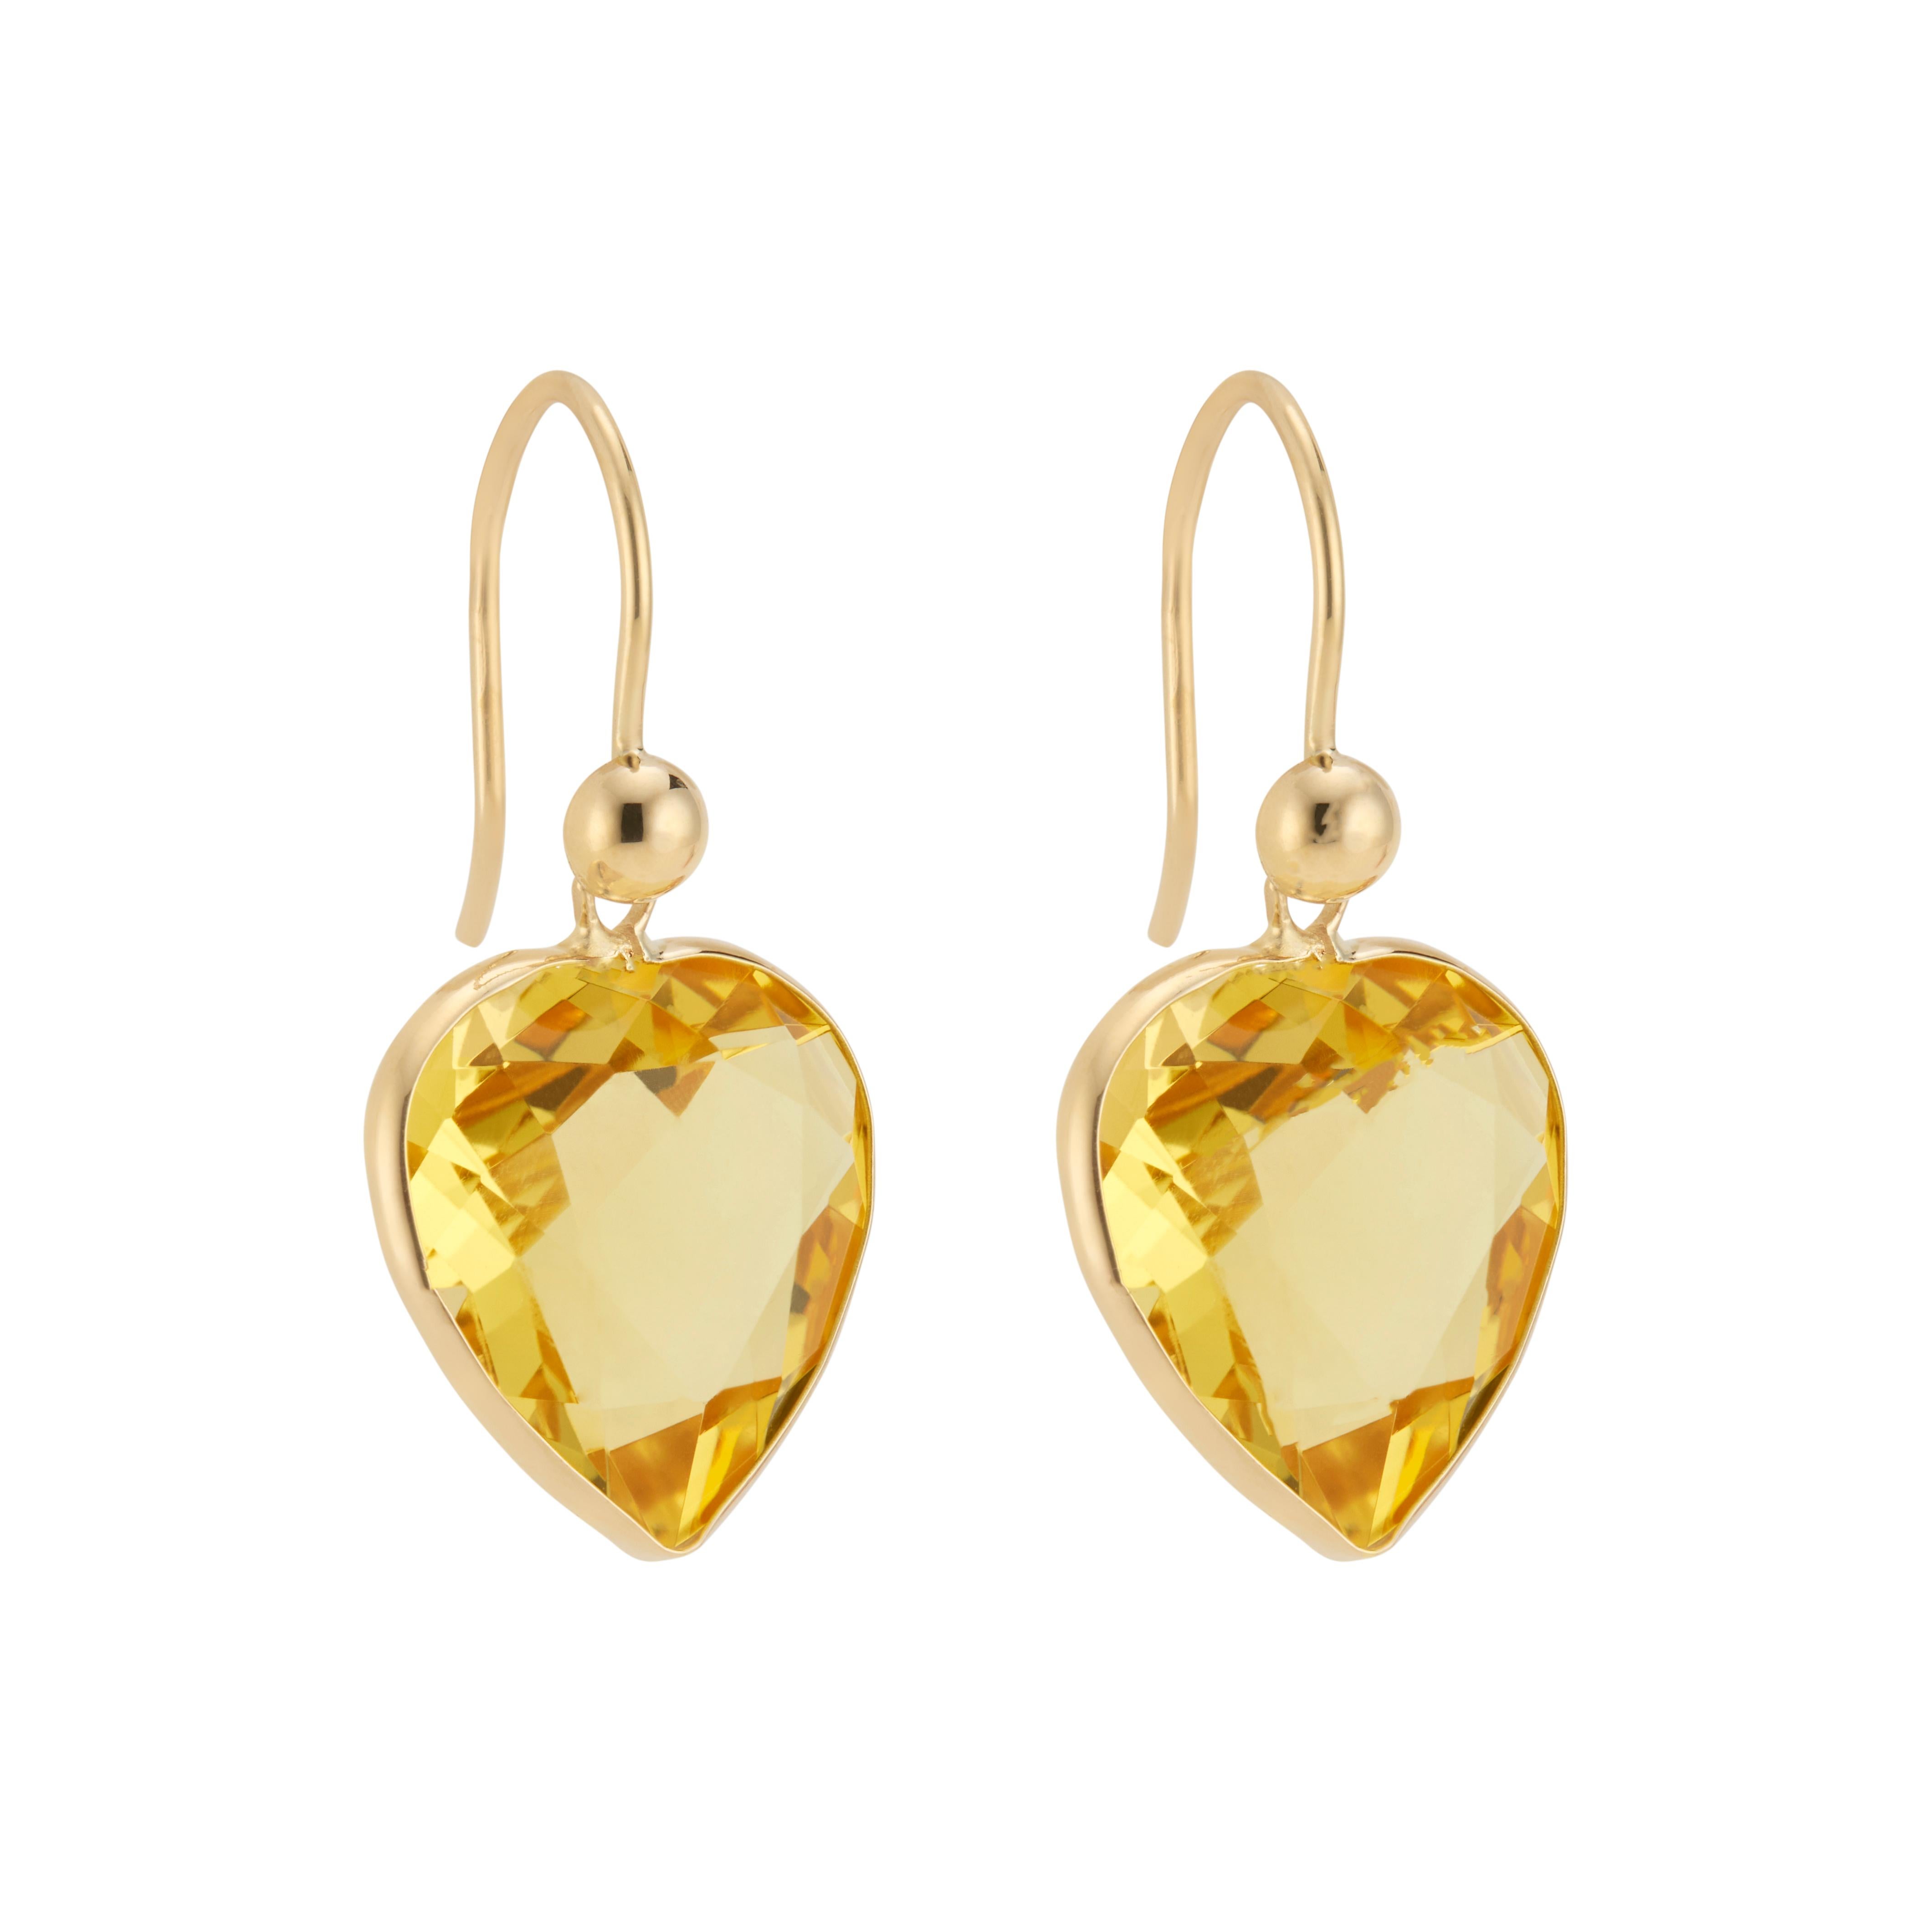 20.00 carat heart shaped citrine dangle earrings in handmade 18k yellow gold settings. Signed FF. 

2 heart shaped orange yellow citrines, approx. 20.00cts
18k yellow gold 
Stamped: 750
Hallmark: FF 
6.4 grams
Top to bottom: 30mm or 13/16